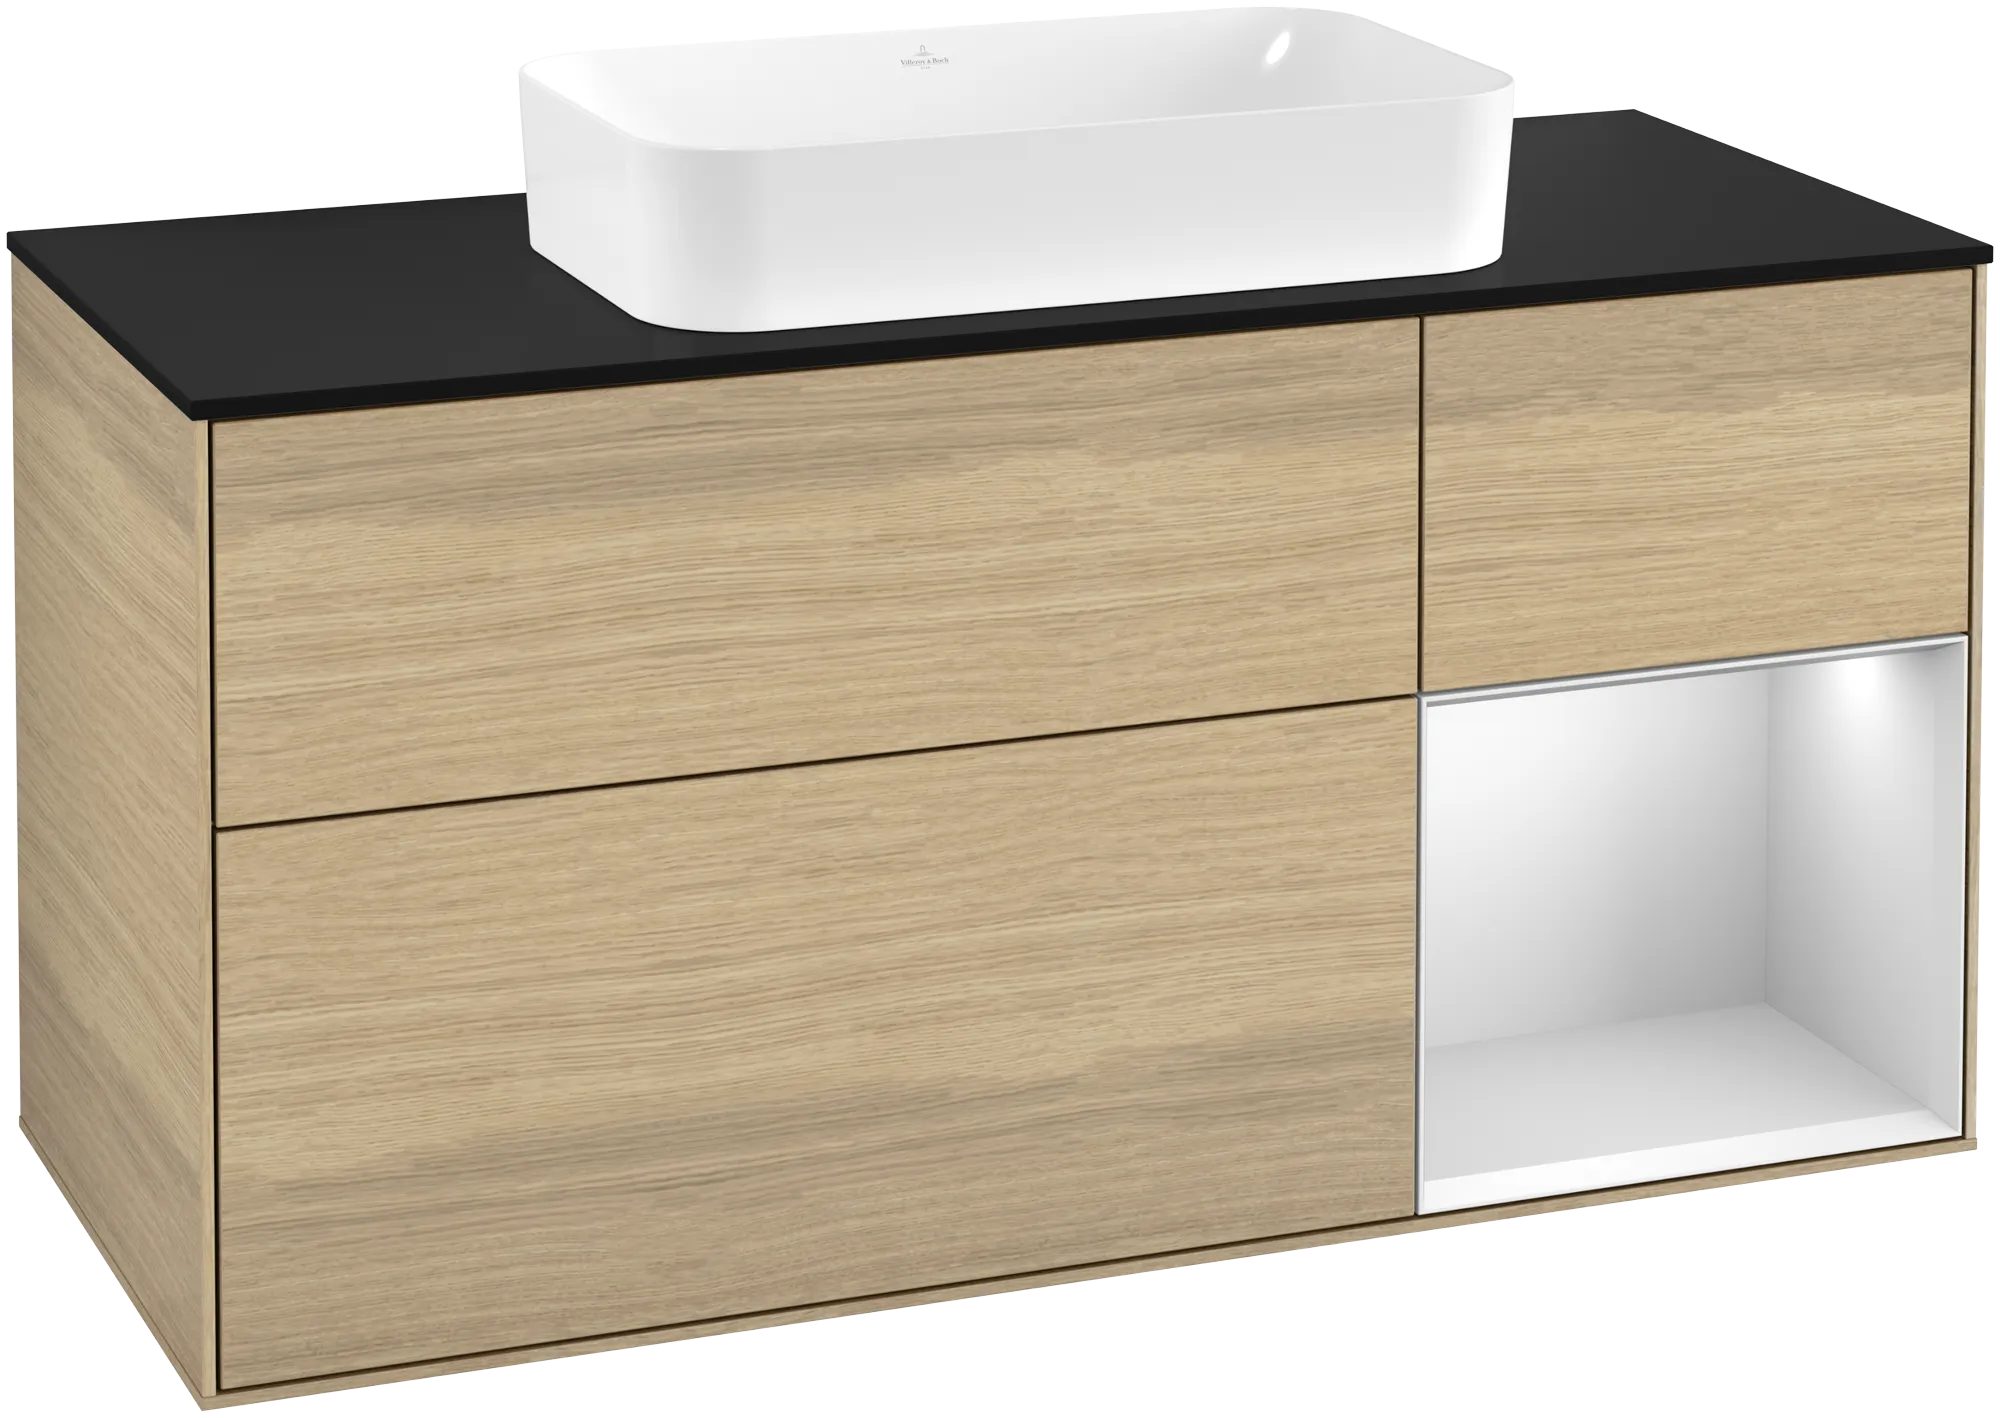 Picture of VILLEROY BOCH Finion Vanity unit, with lighting, 3 pull-out compartments, 1200 x 603 x 501 mm, Oak Veneer / White Matt Lacquer / Glass Black Matt #G302MTPC